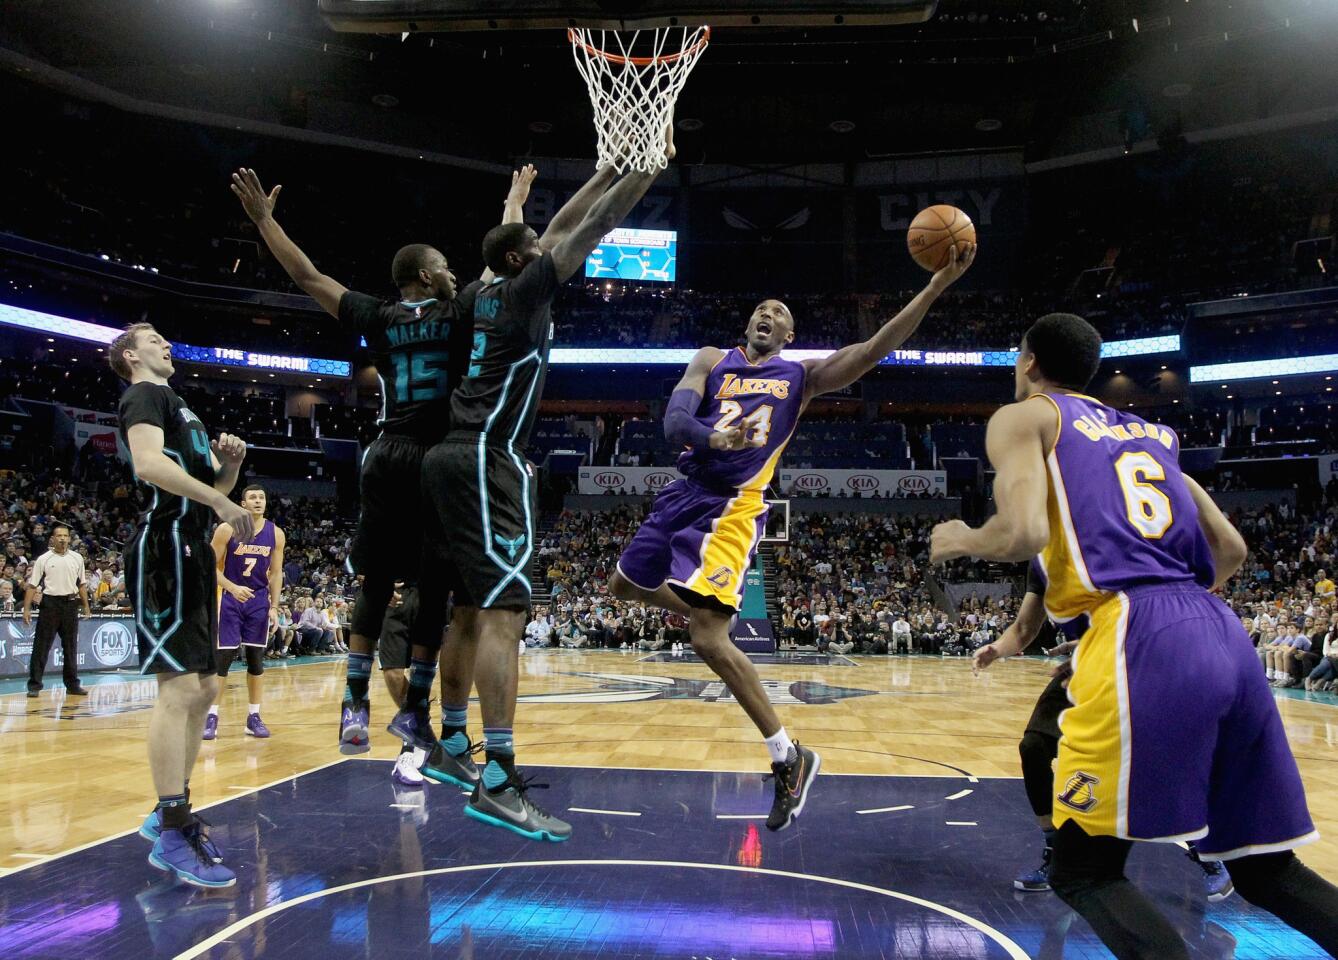 Lakers forward Kobe Bryant drives to the basket against the Charlotte Hornets.